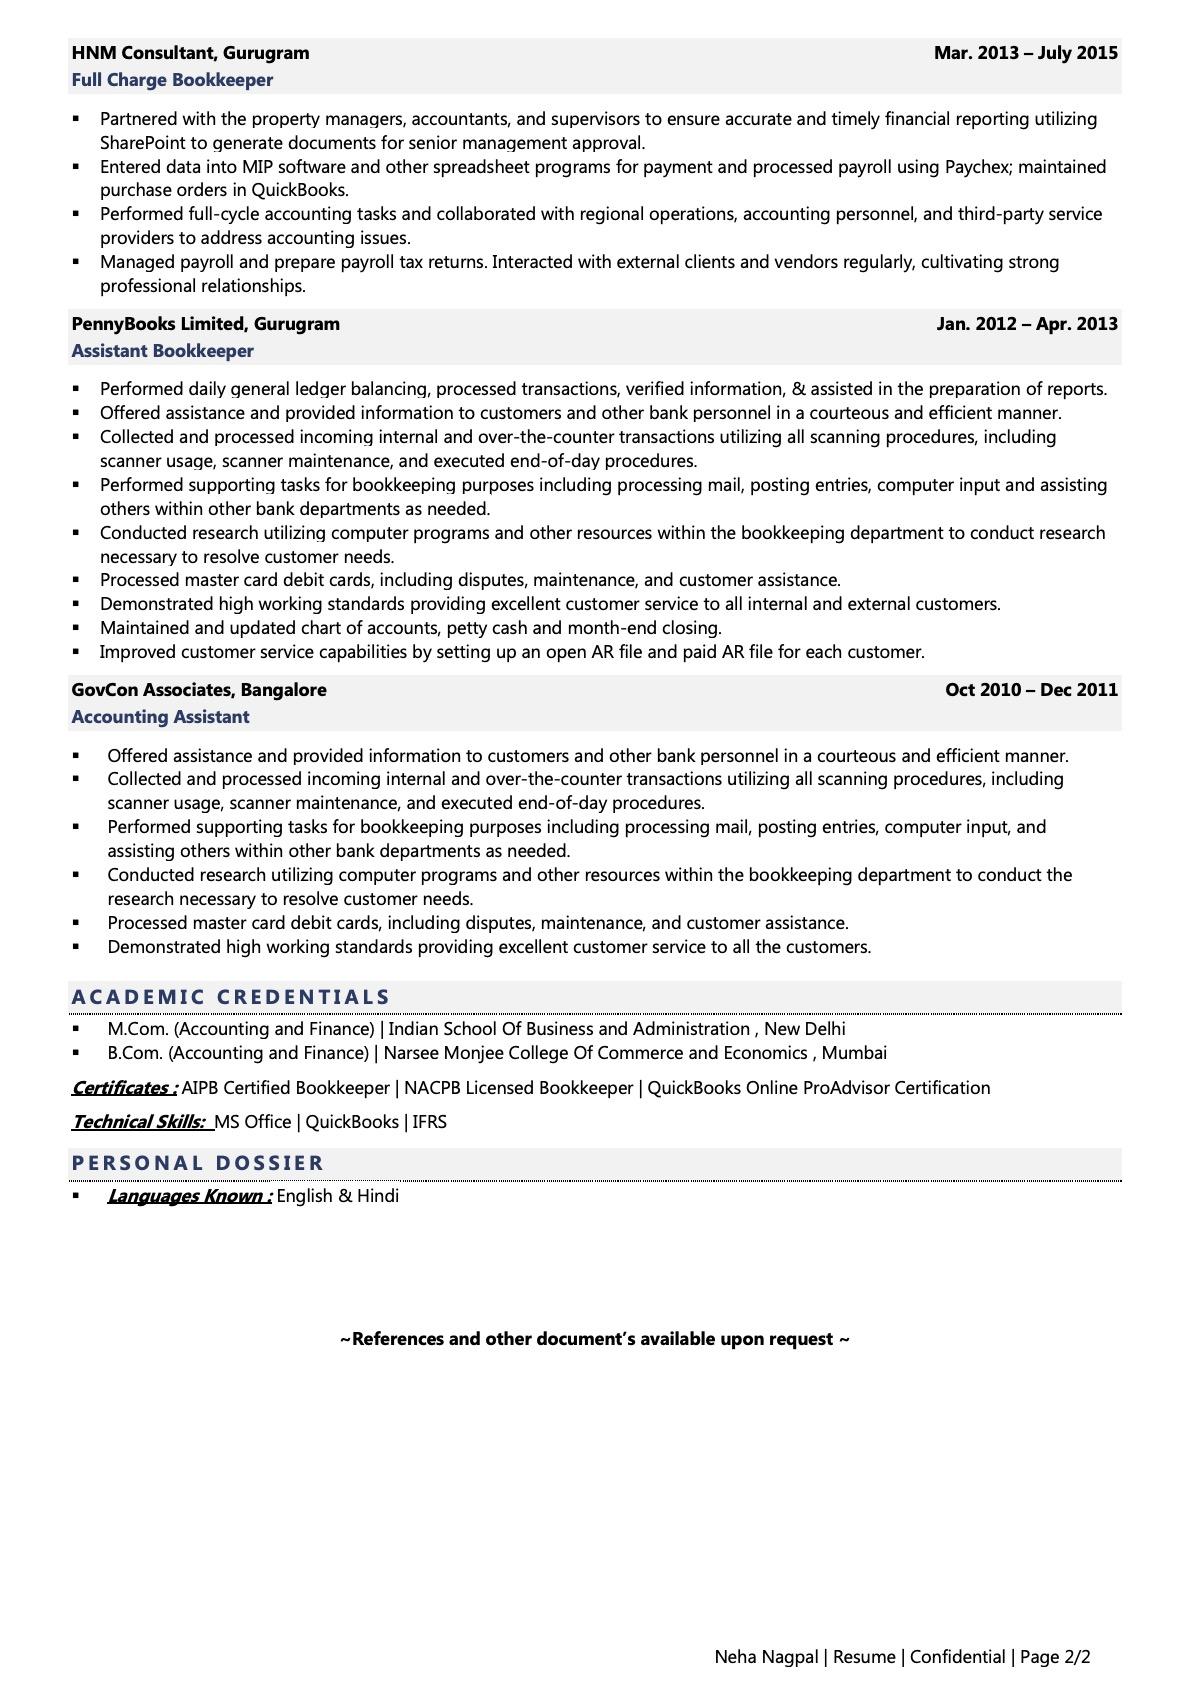 resume examples for bookkeeper